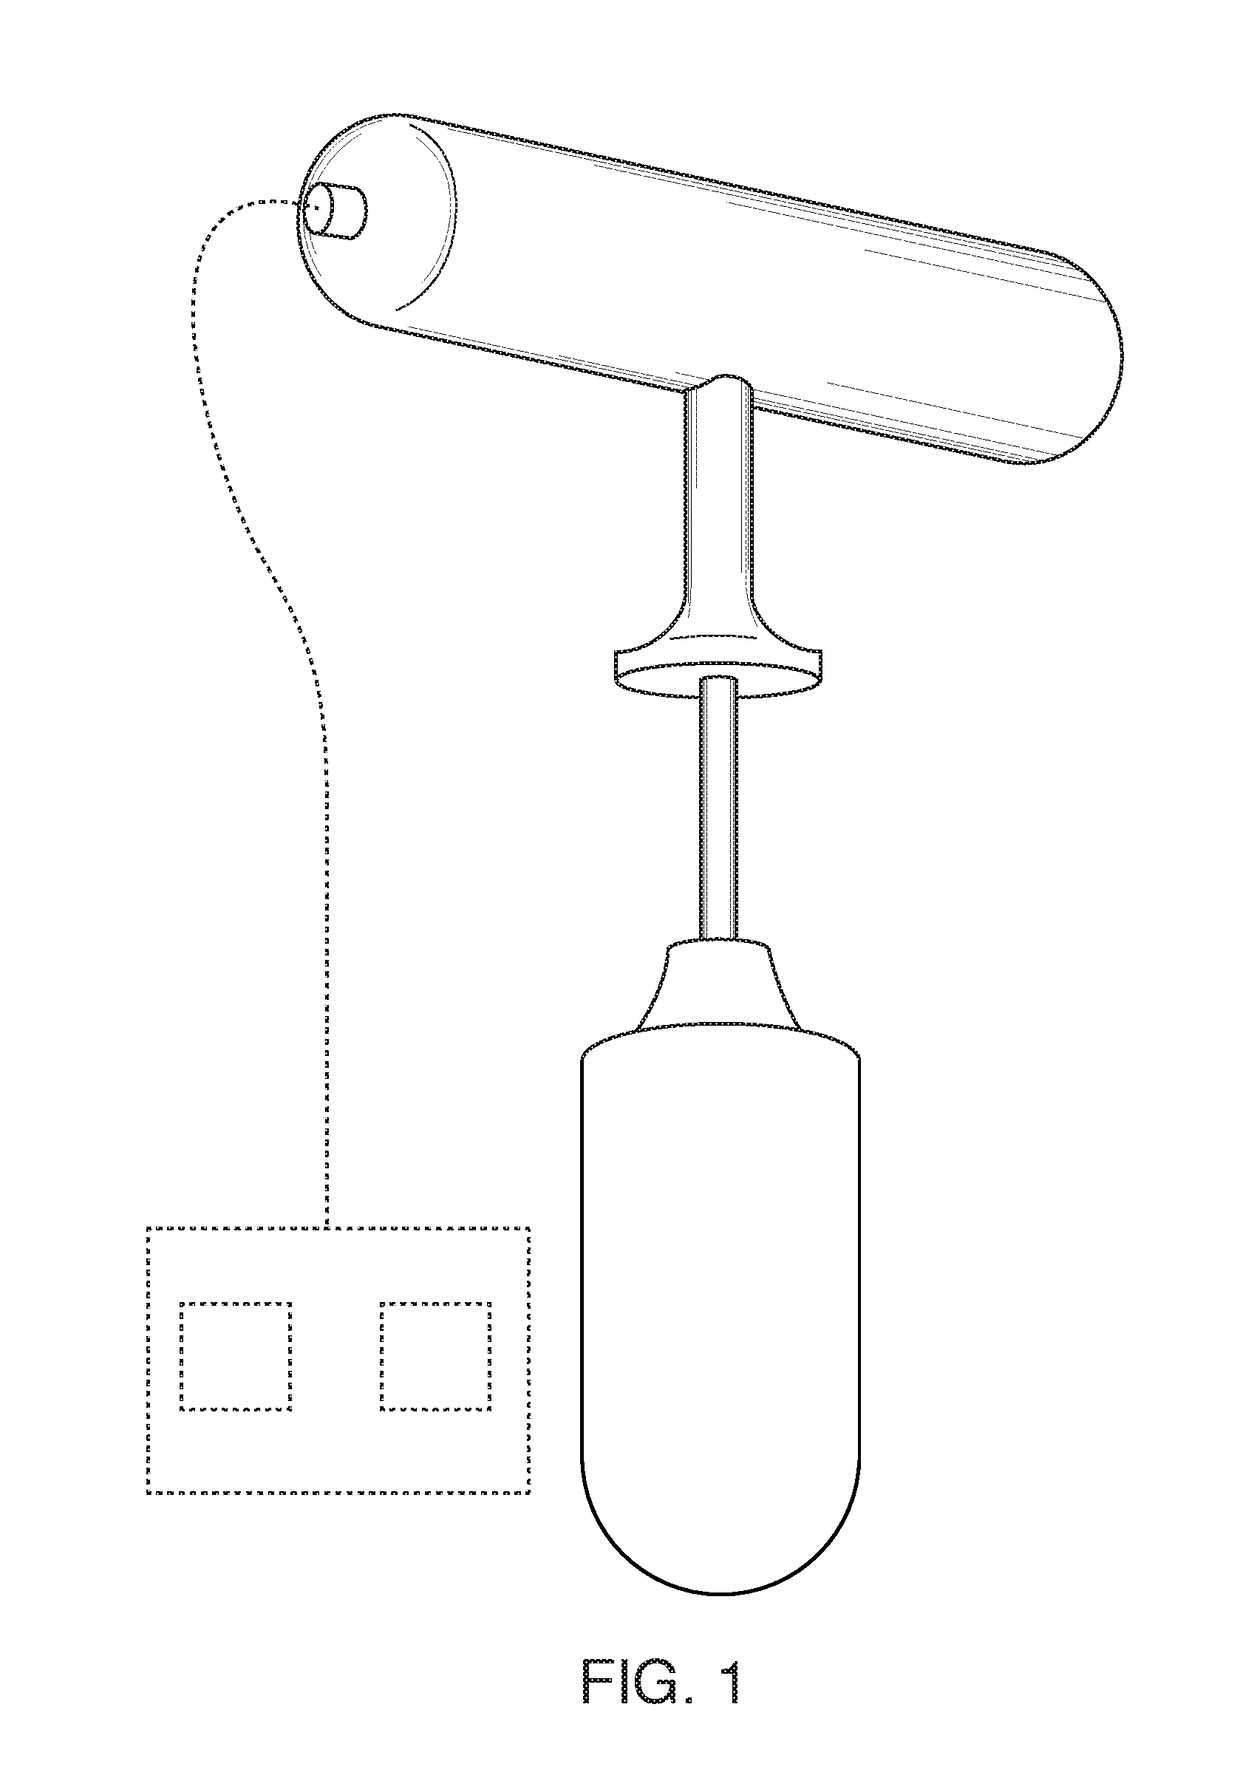 Device for the Application of Electrical Stimulation in Combination with Manual Therapy